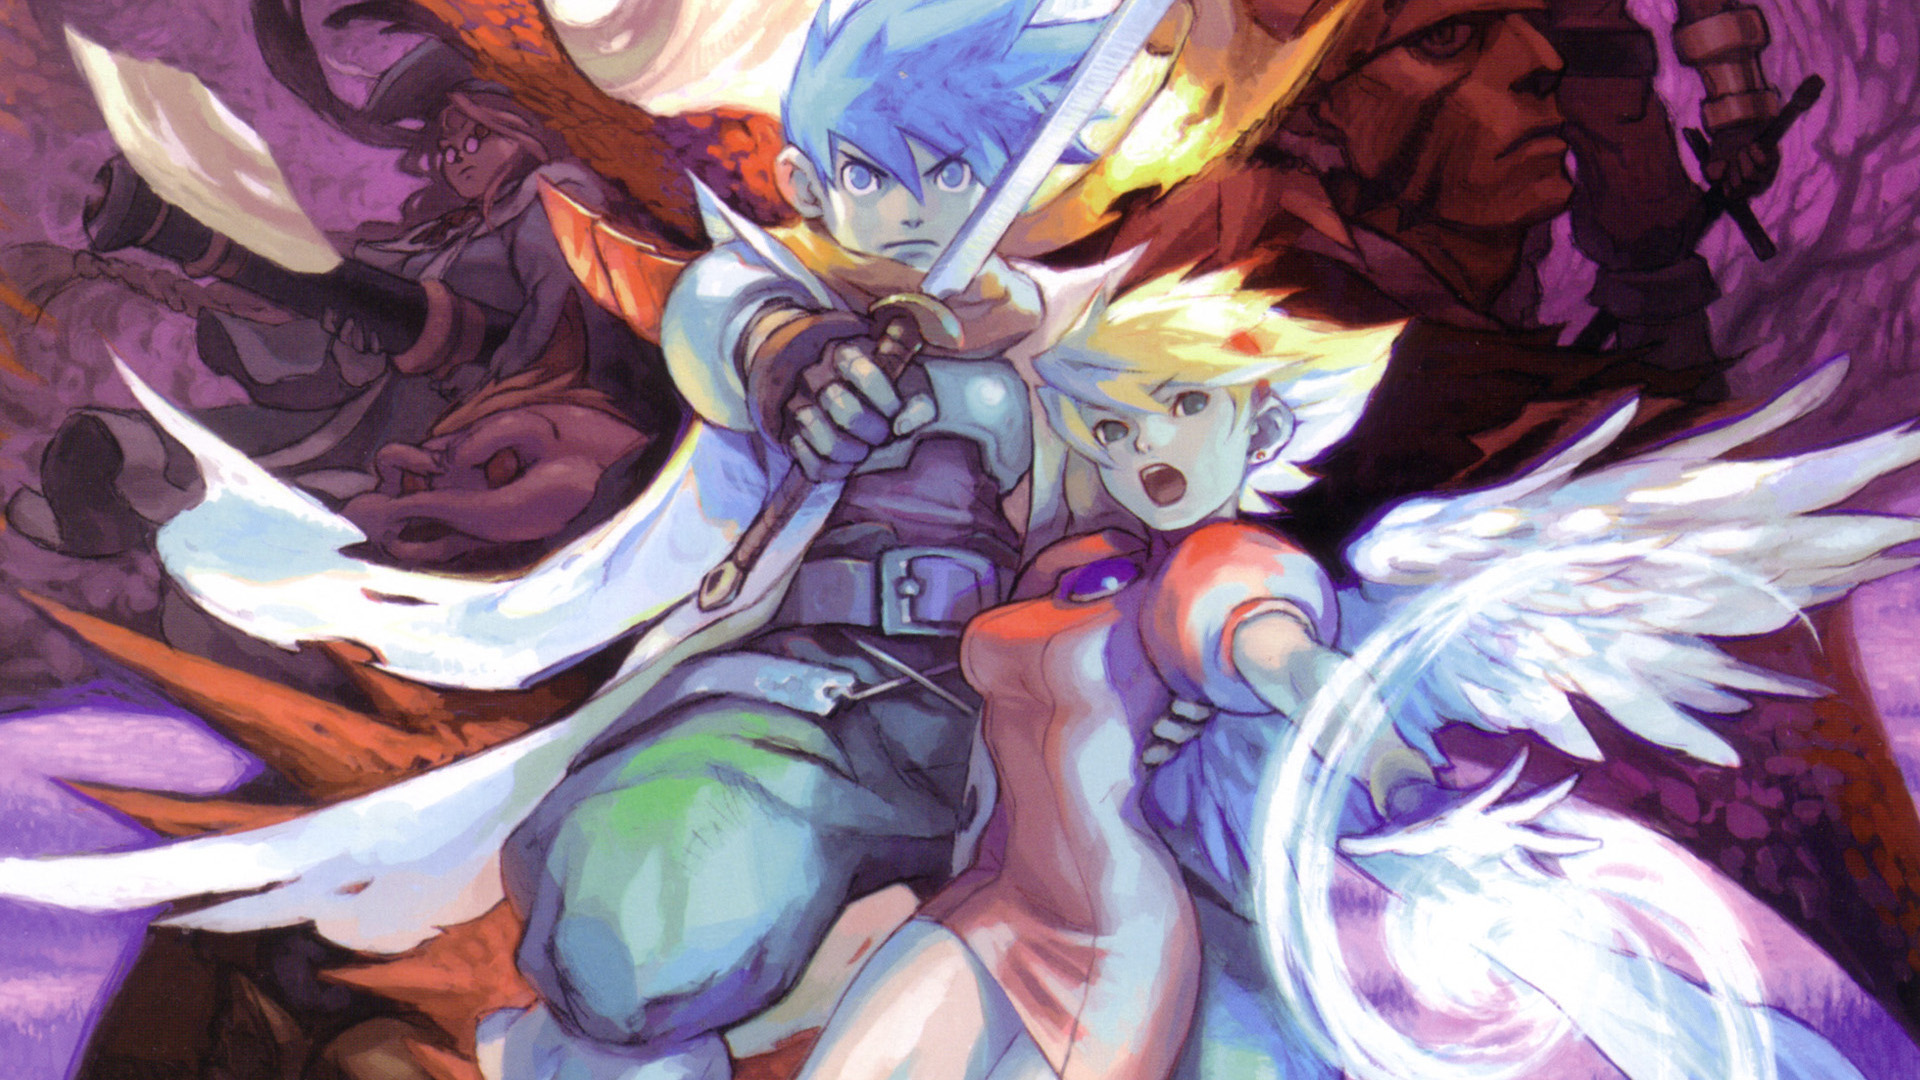 breath-of-fire-iii-details-launchbox-games-database